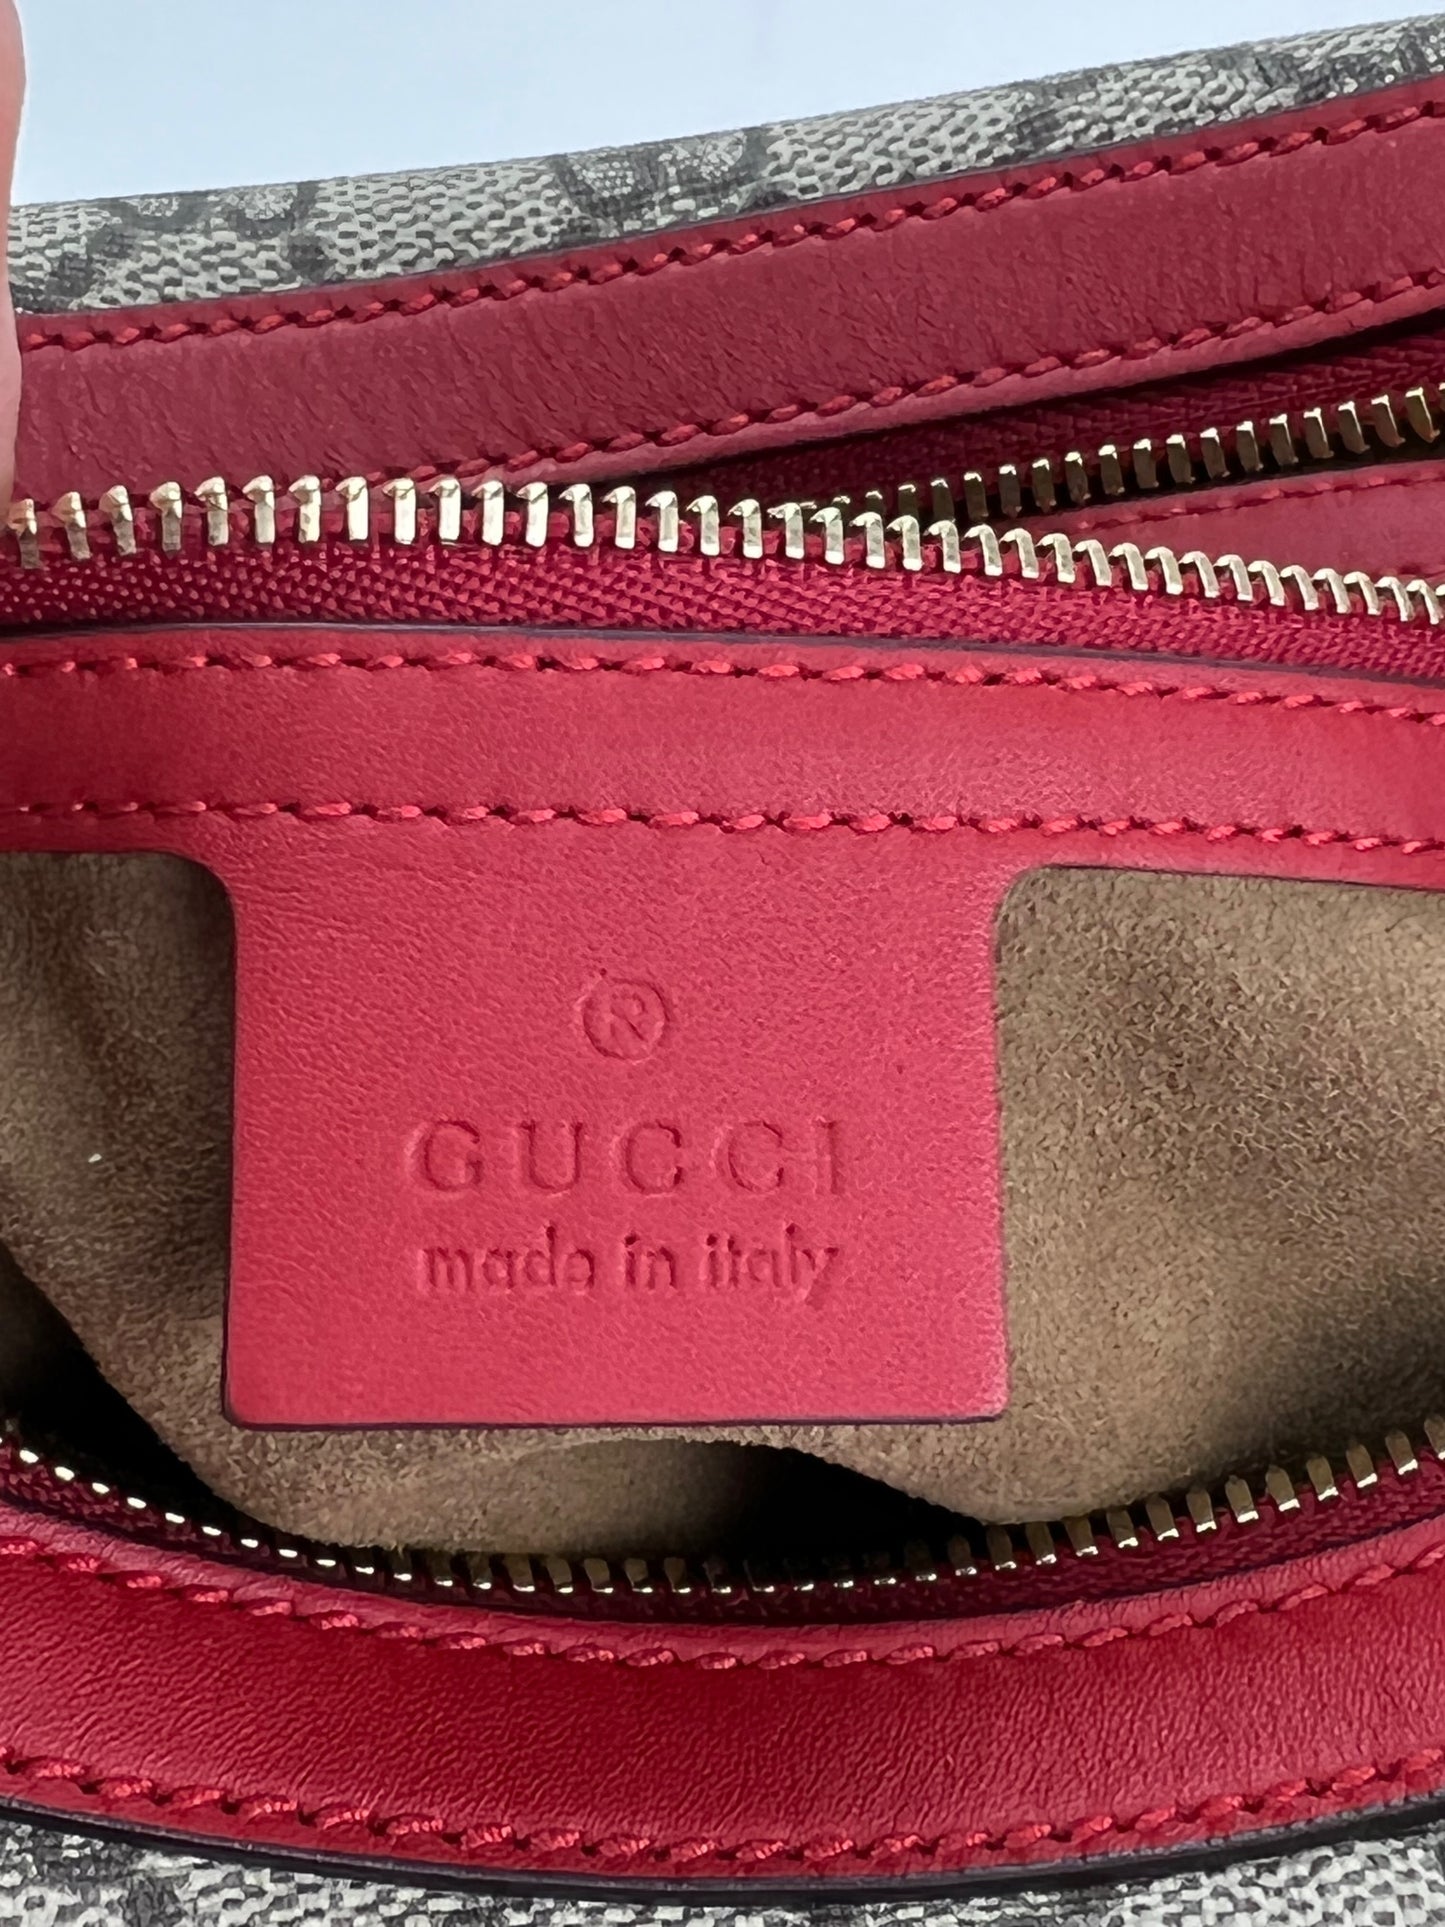 Gucci, Bags, Authentic Pink Gucci Shoulder Tote Bag Gg Canvas